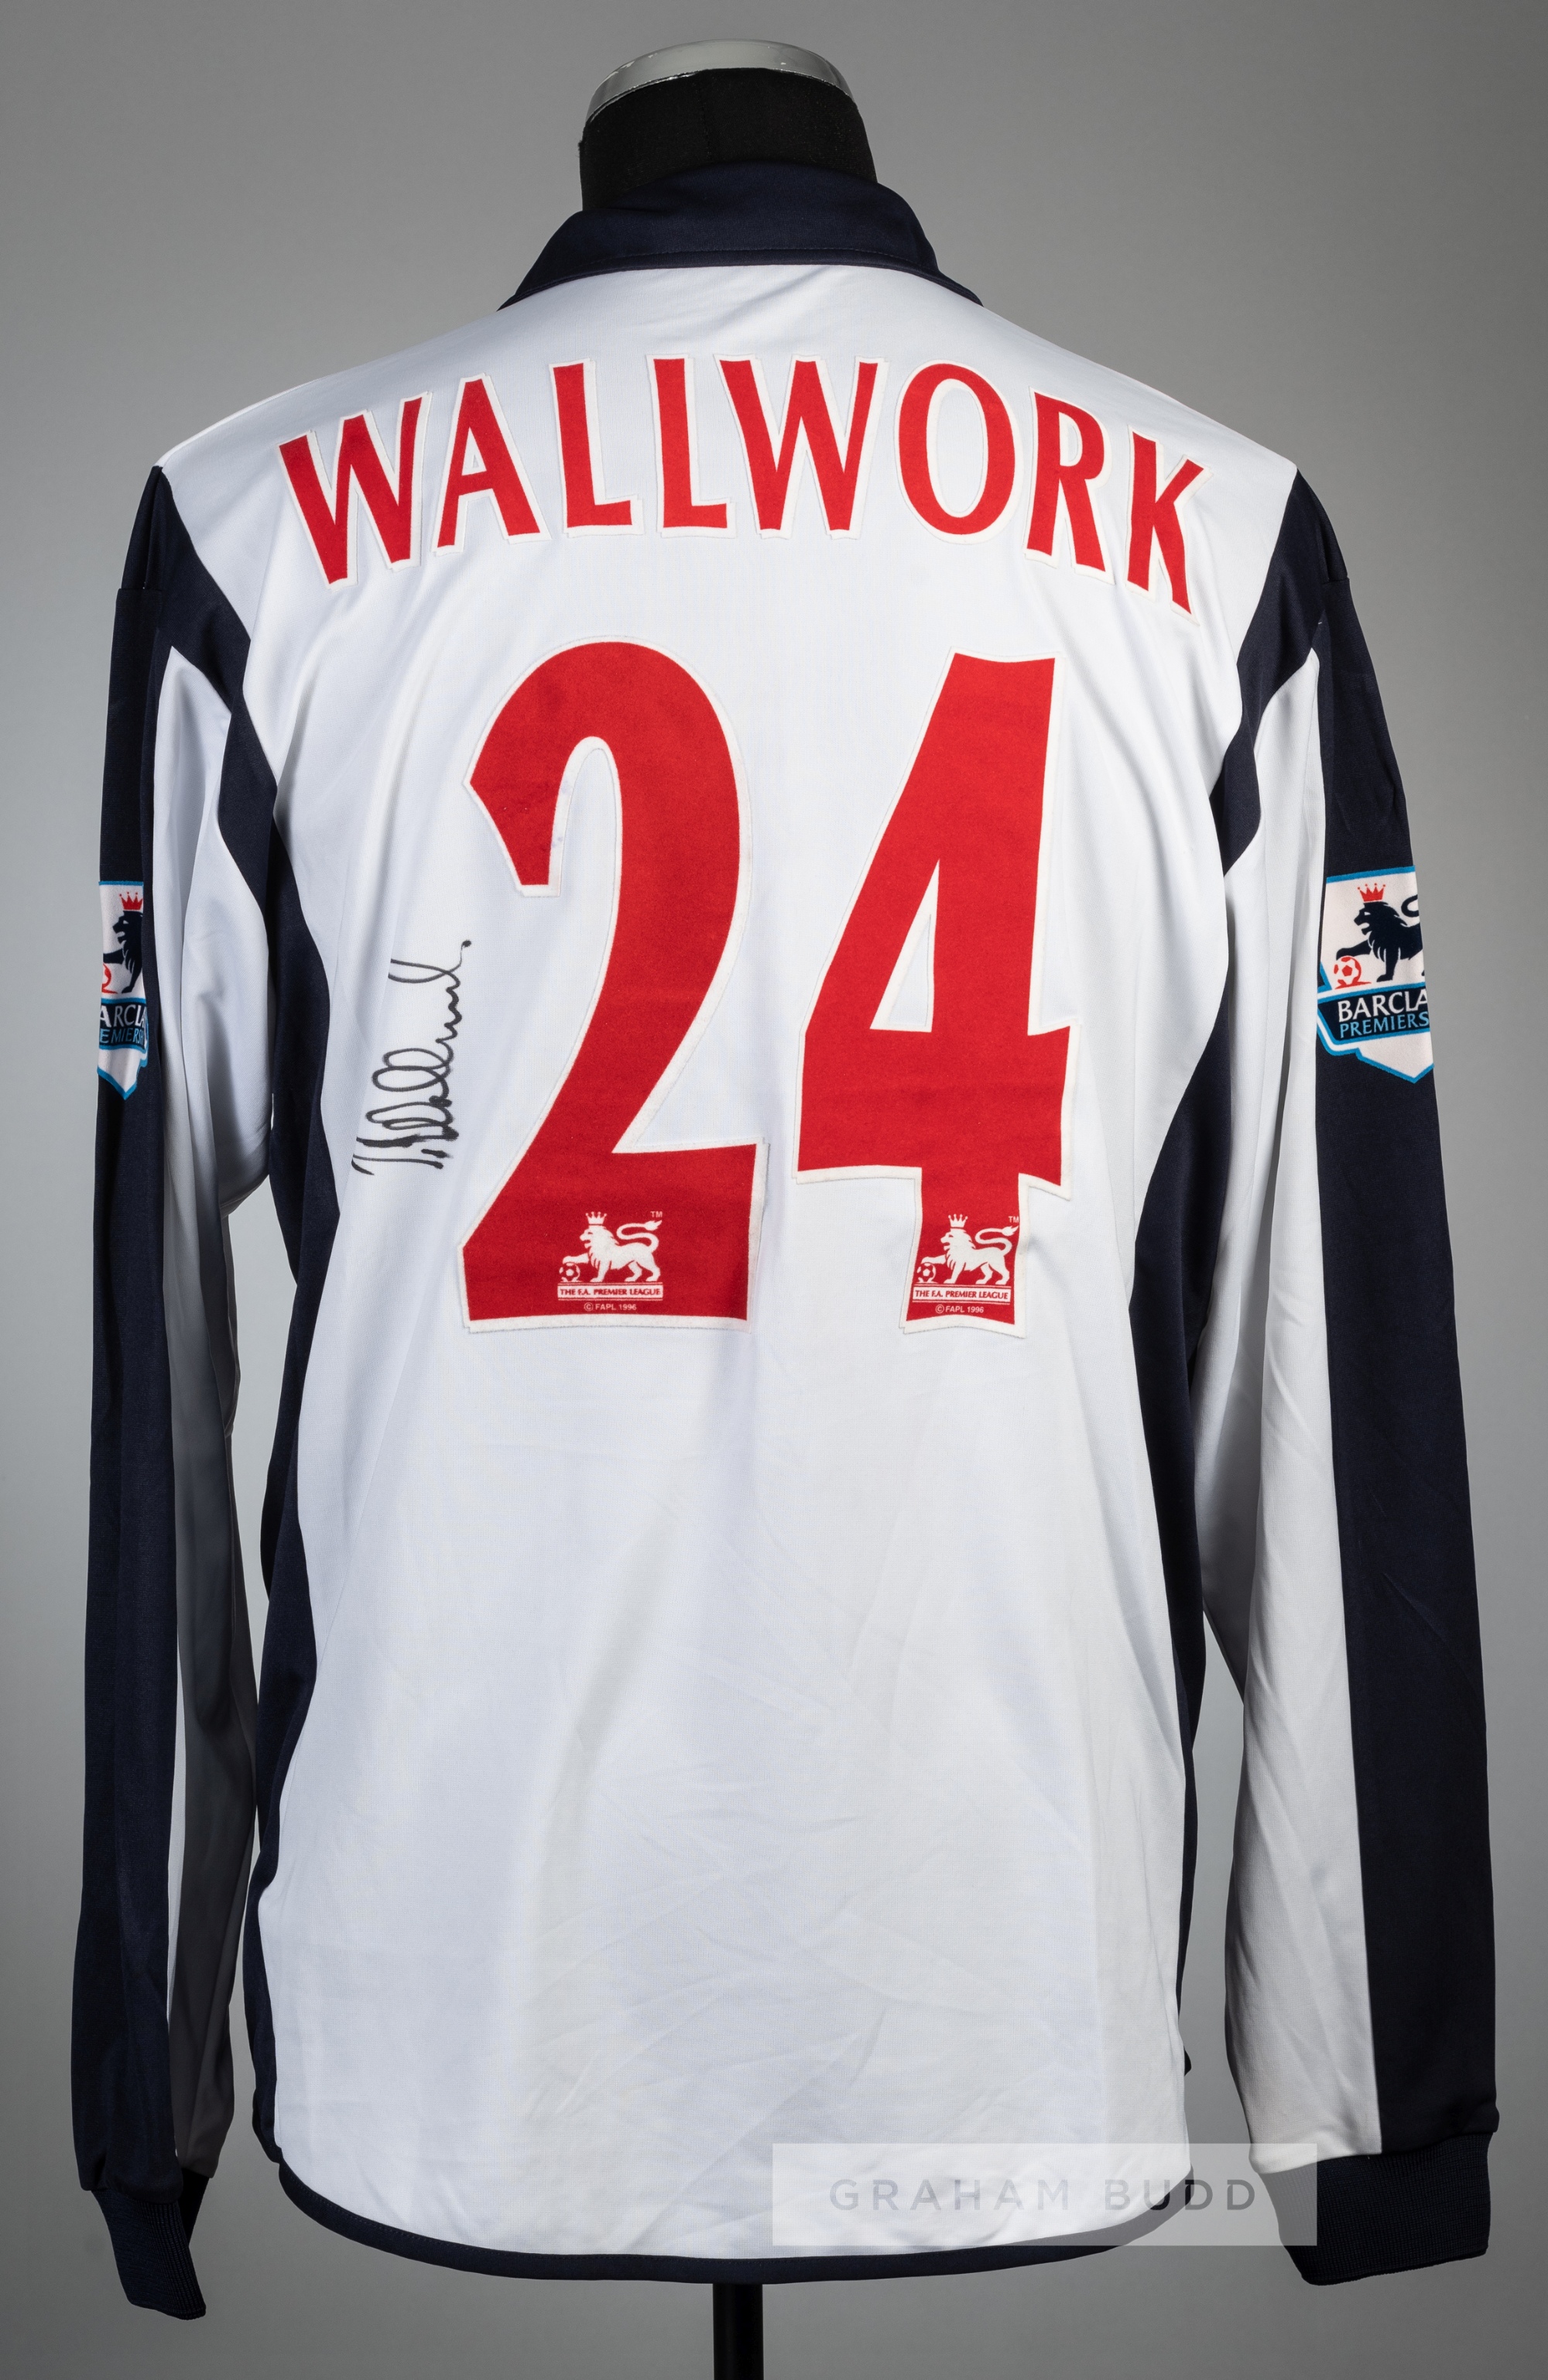 Ronnie Wallwork signed navy and white West Bromwich Albion no.24 home jersey, season 2005-06,